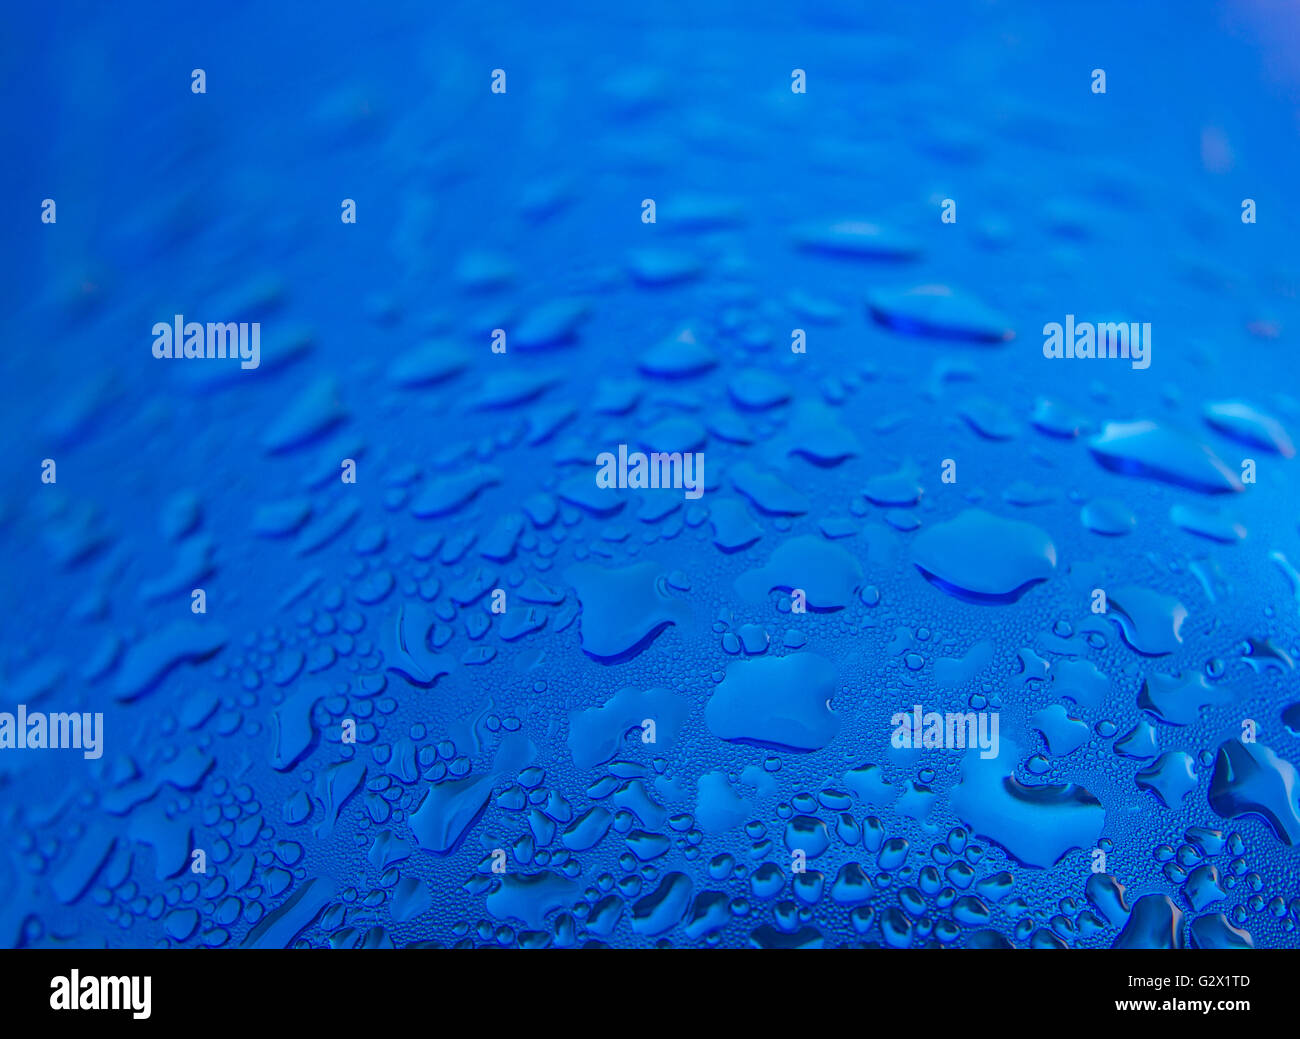 Water drops on round blue background, soft focus, close up Stock Photo